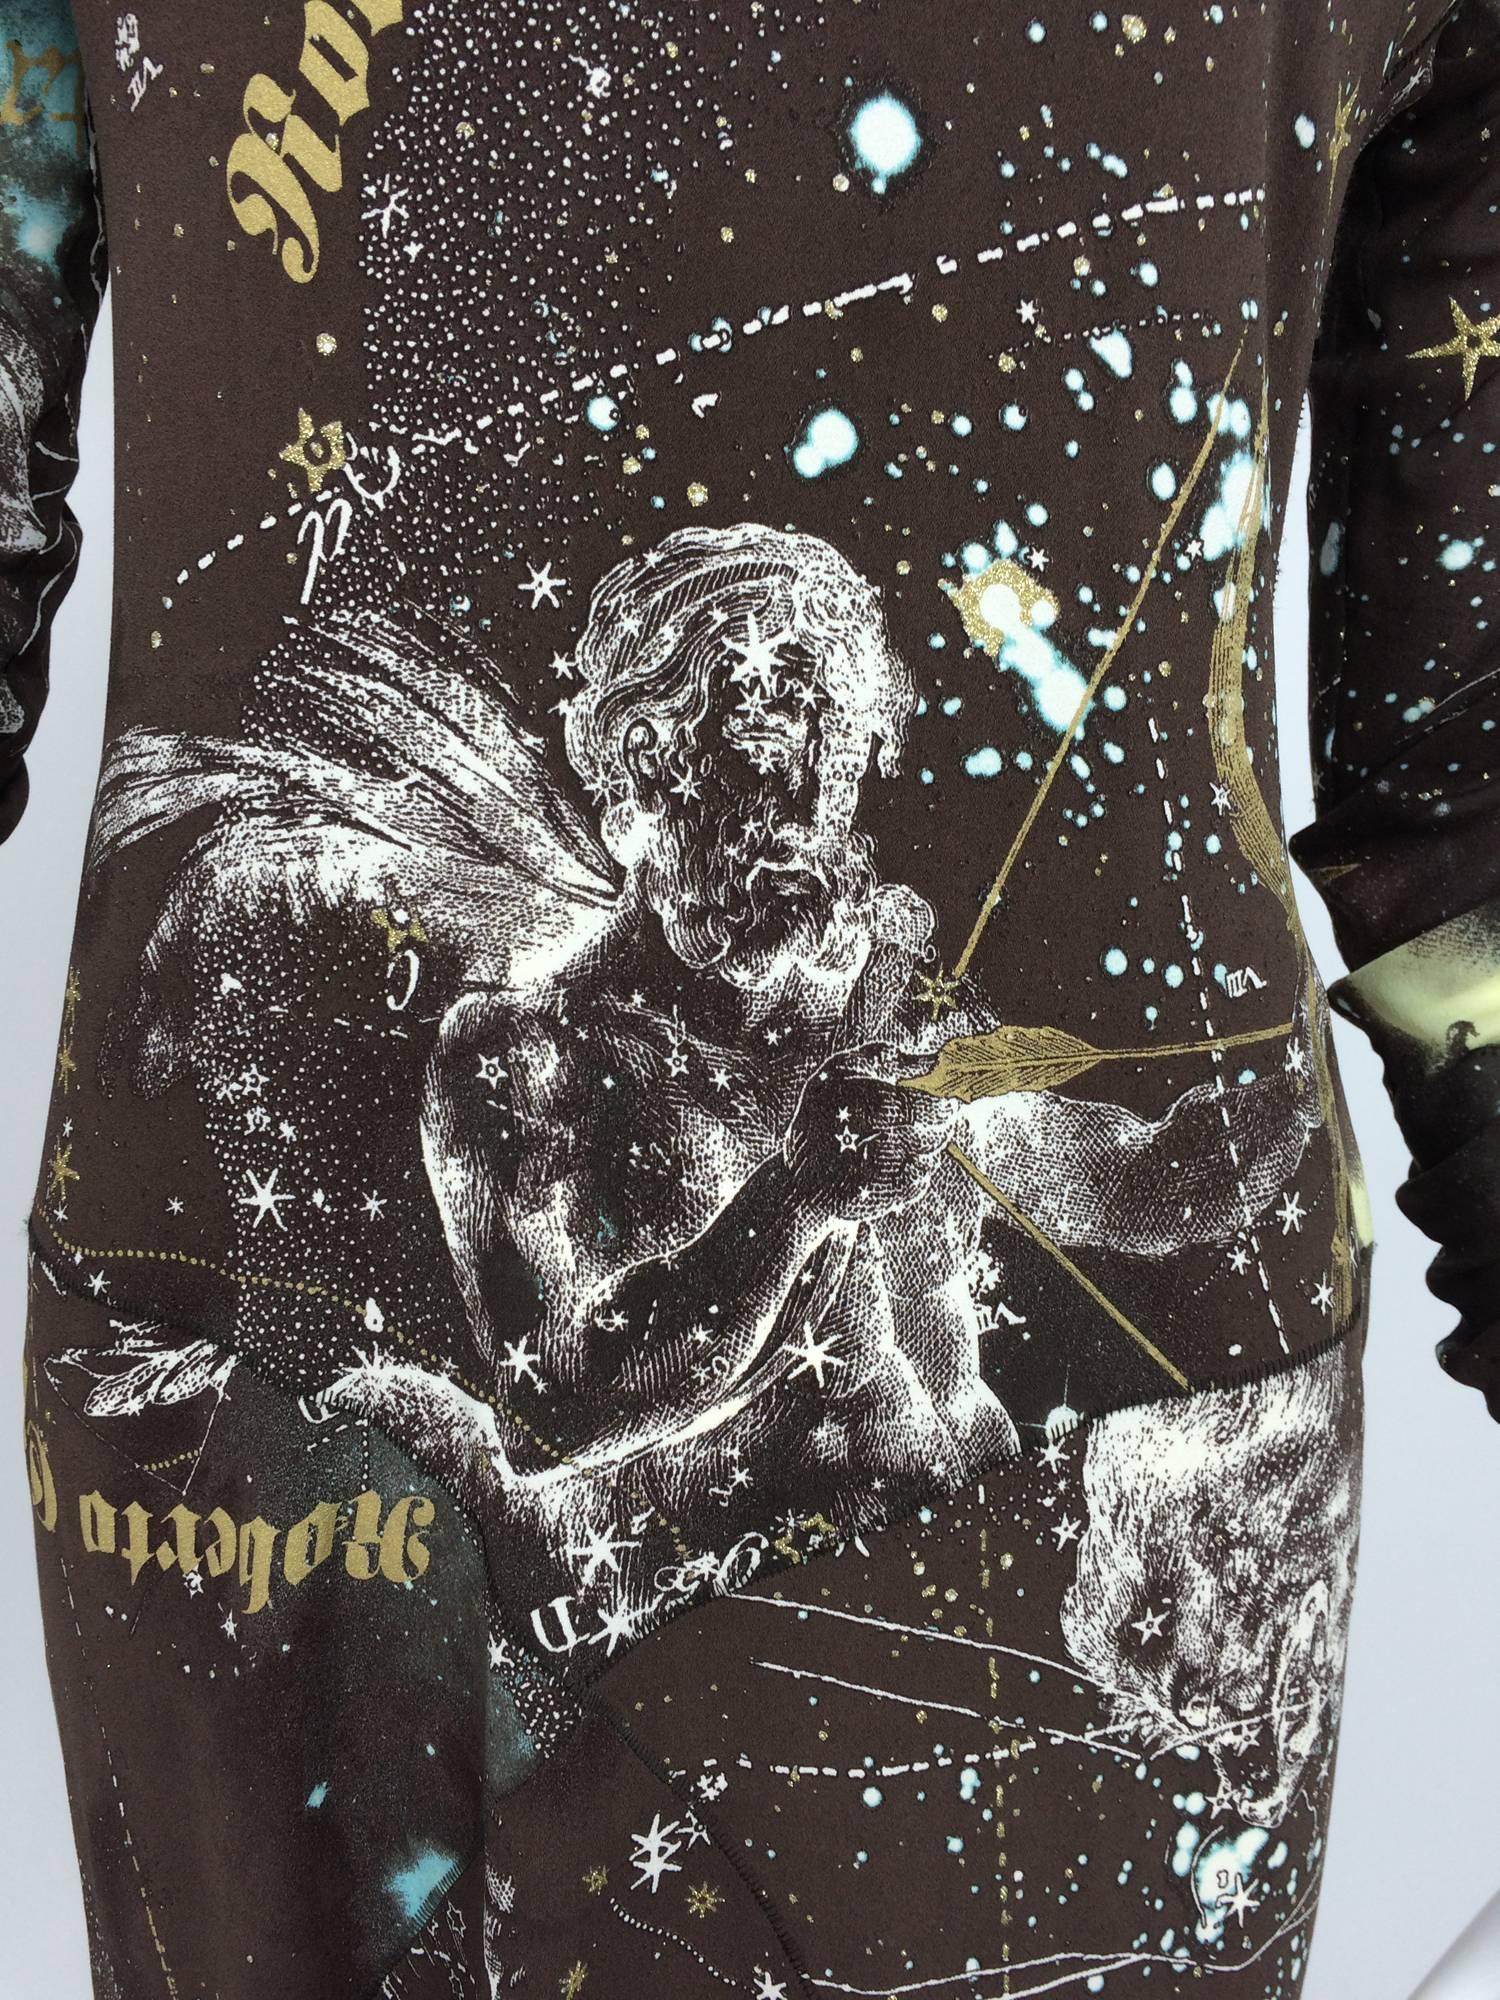 Roberto Cavalli rare silk Constellation dress 1990s...Chocolate brown silk (with 3% Lycra for a bit of stretch) fabric is printed all over with stars in gold glitter, constellations, the milky way and astral symbols, with sky blue highlights +